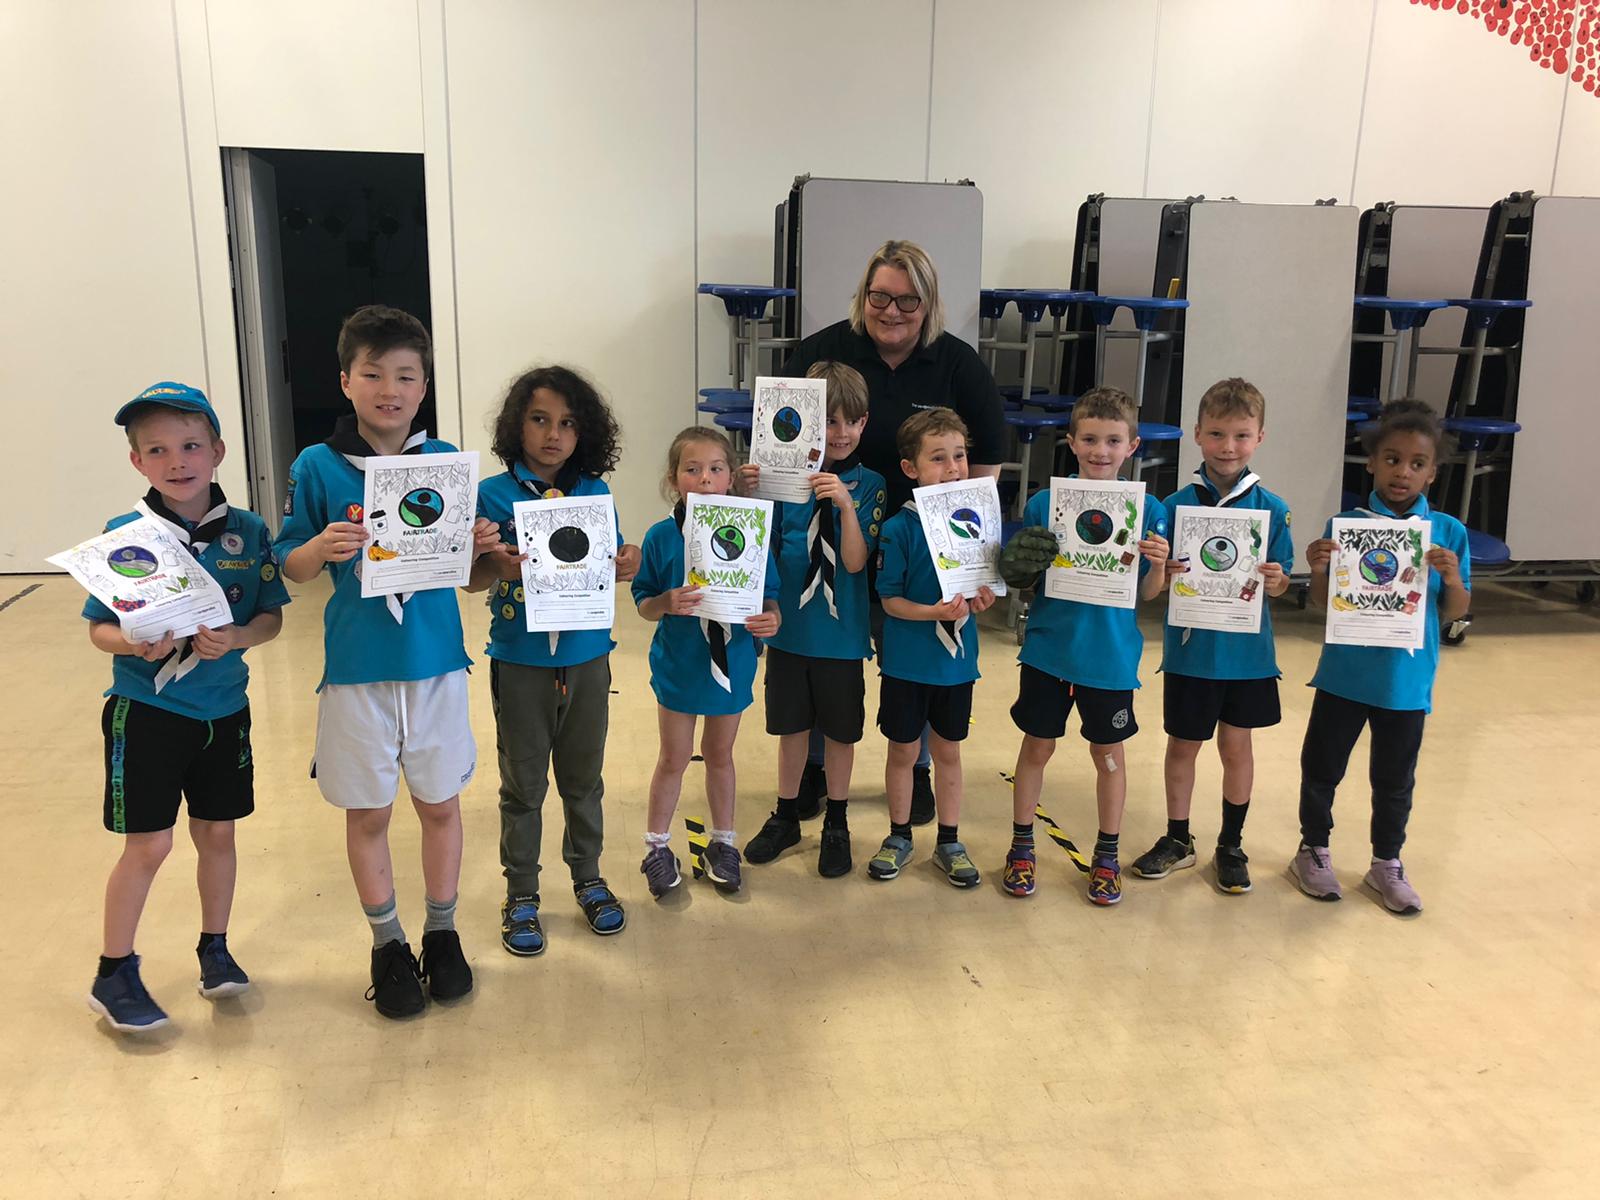 Fairtrade sessions with local Beavers' Group